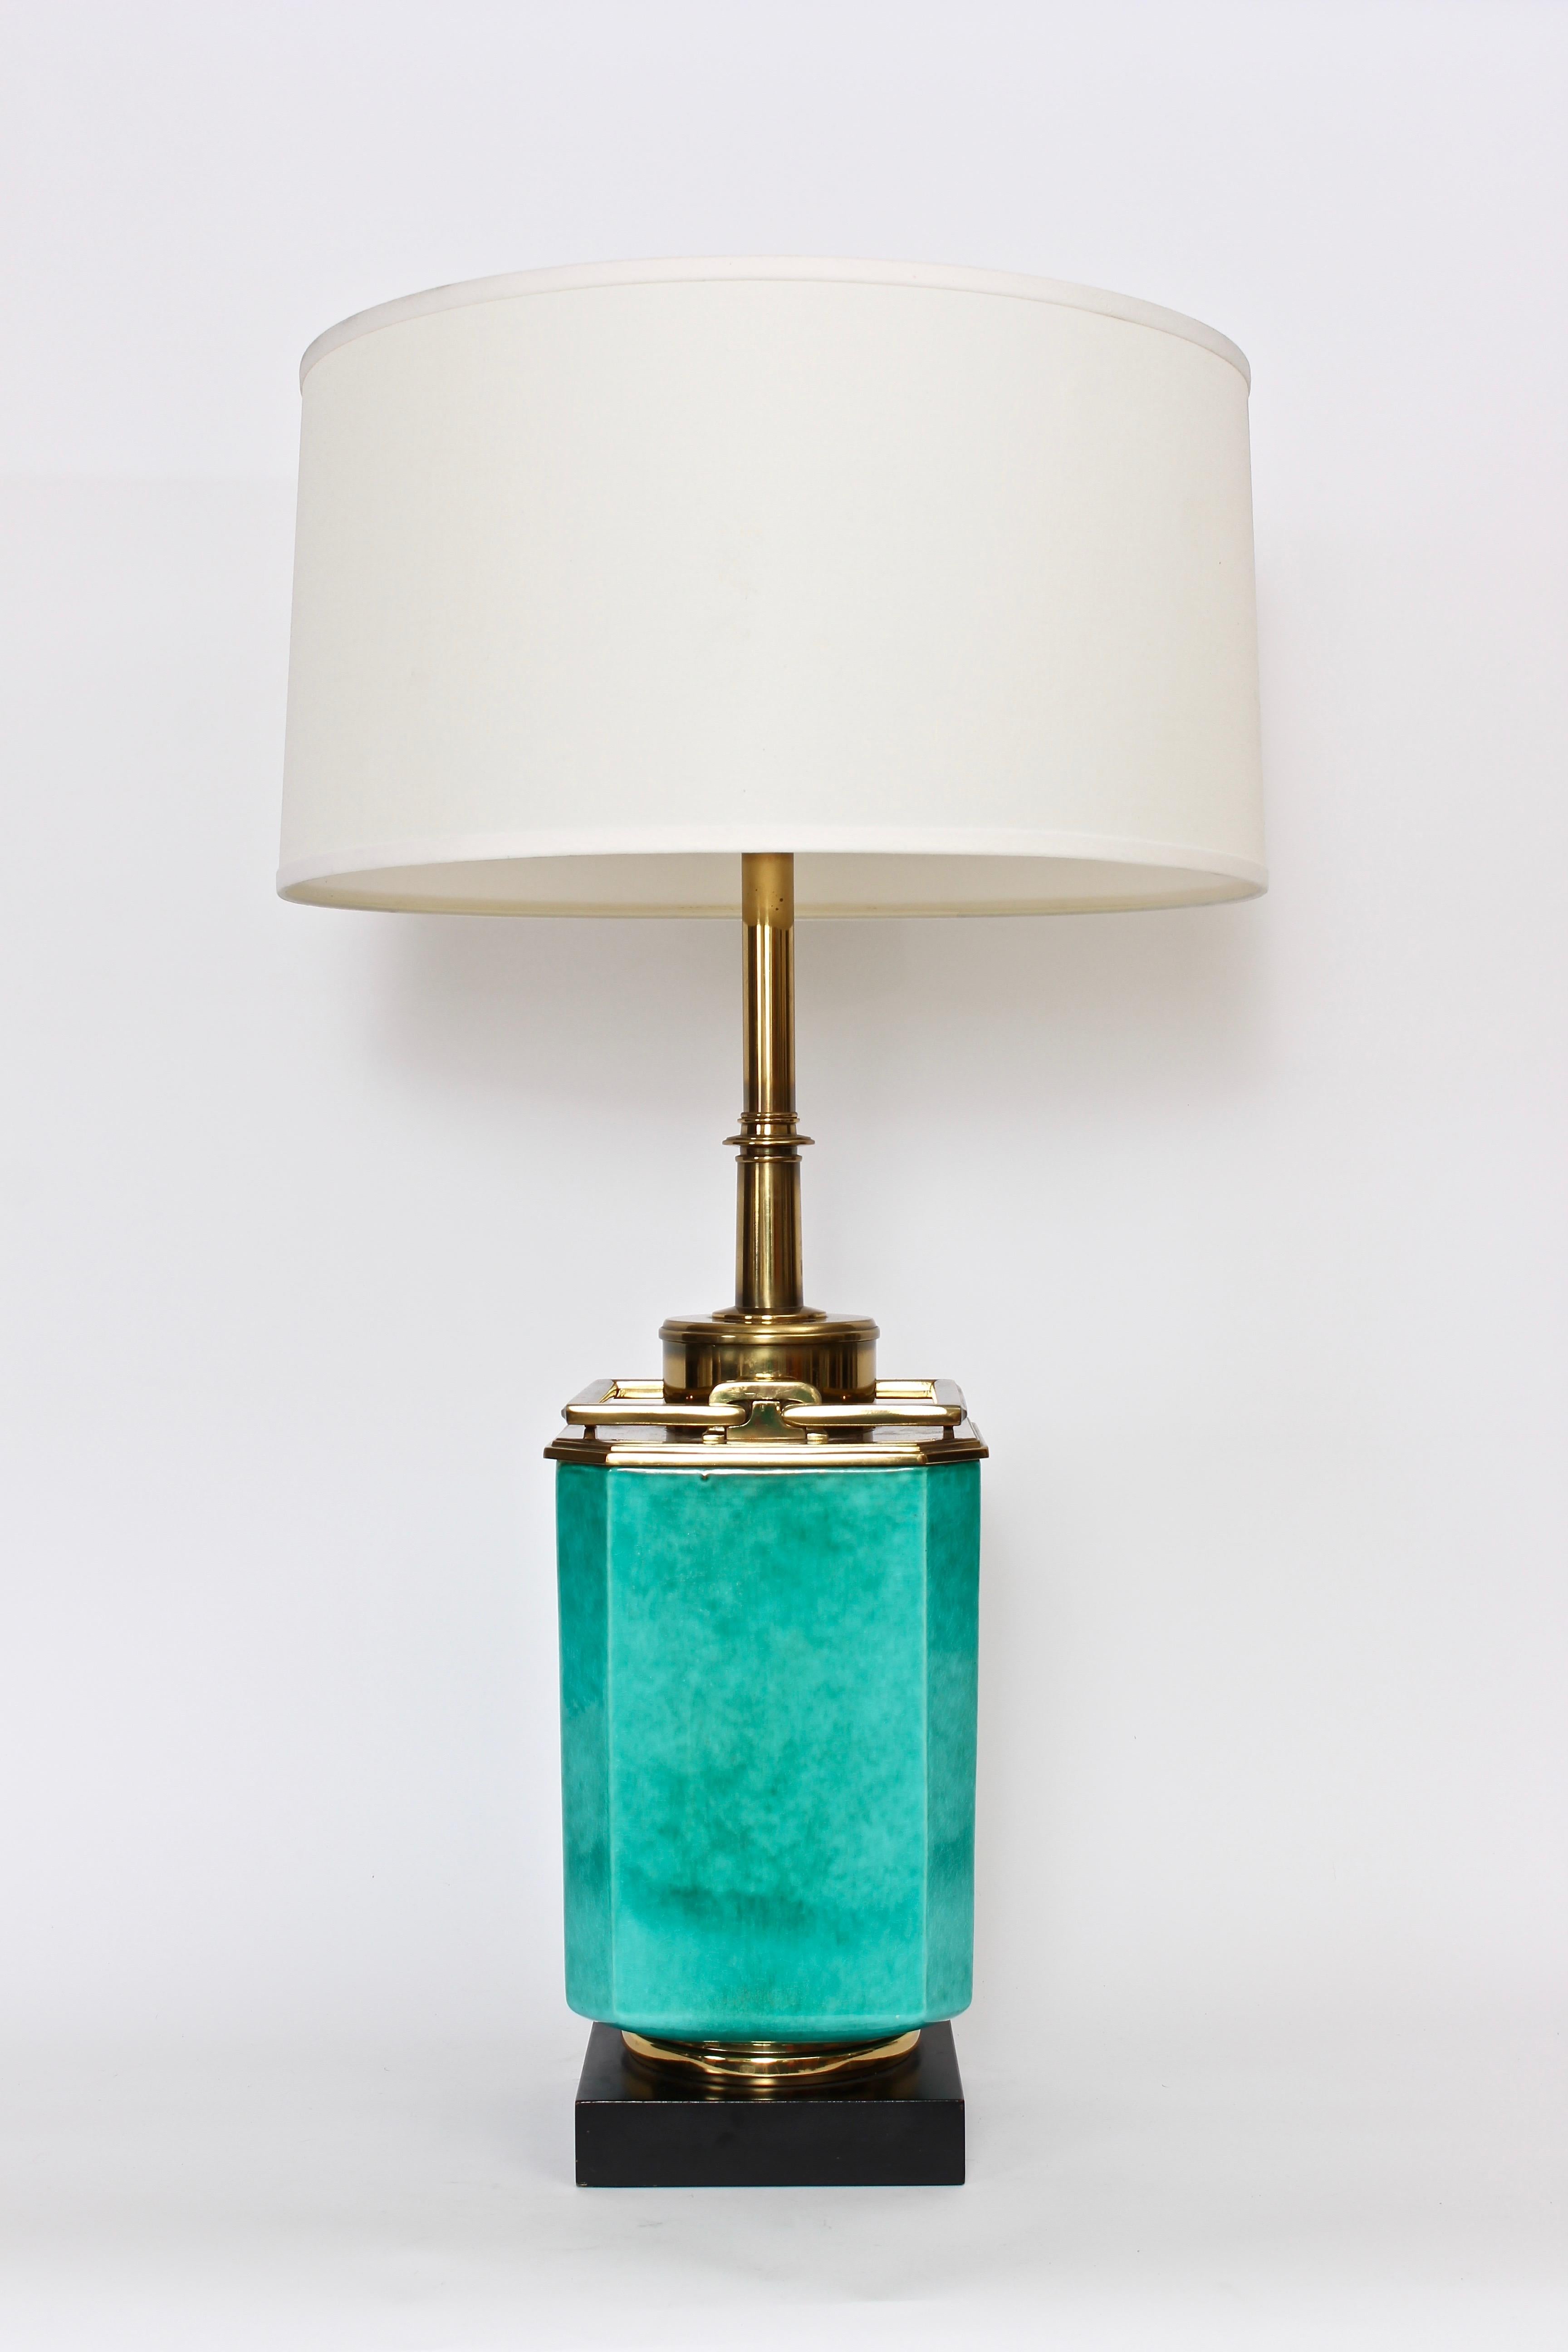 Hollywood Regency Tall Edwin Cole for Stiffel Aqua Ceramic & Brass Table Lamp with Glass Shade